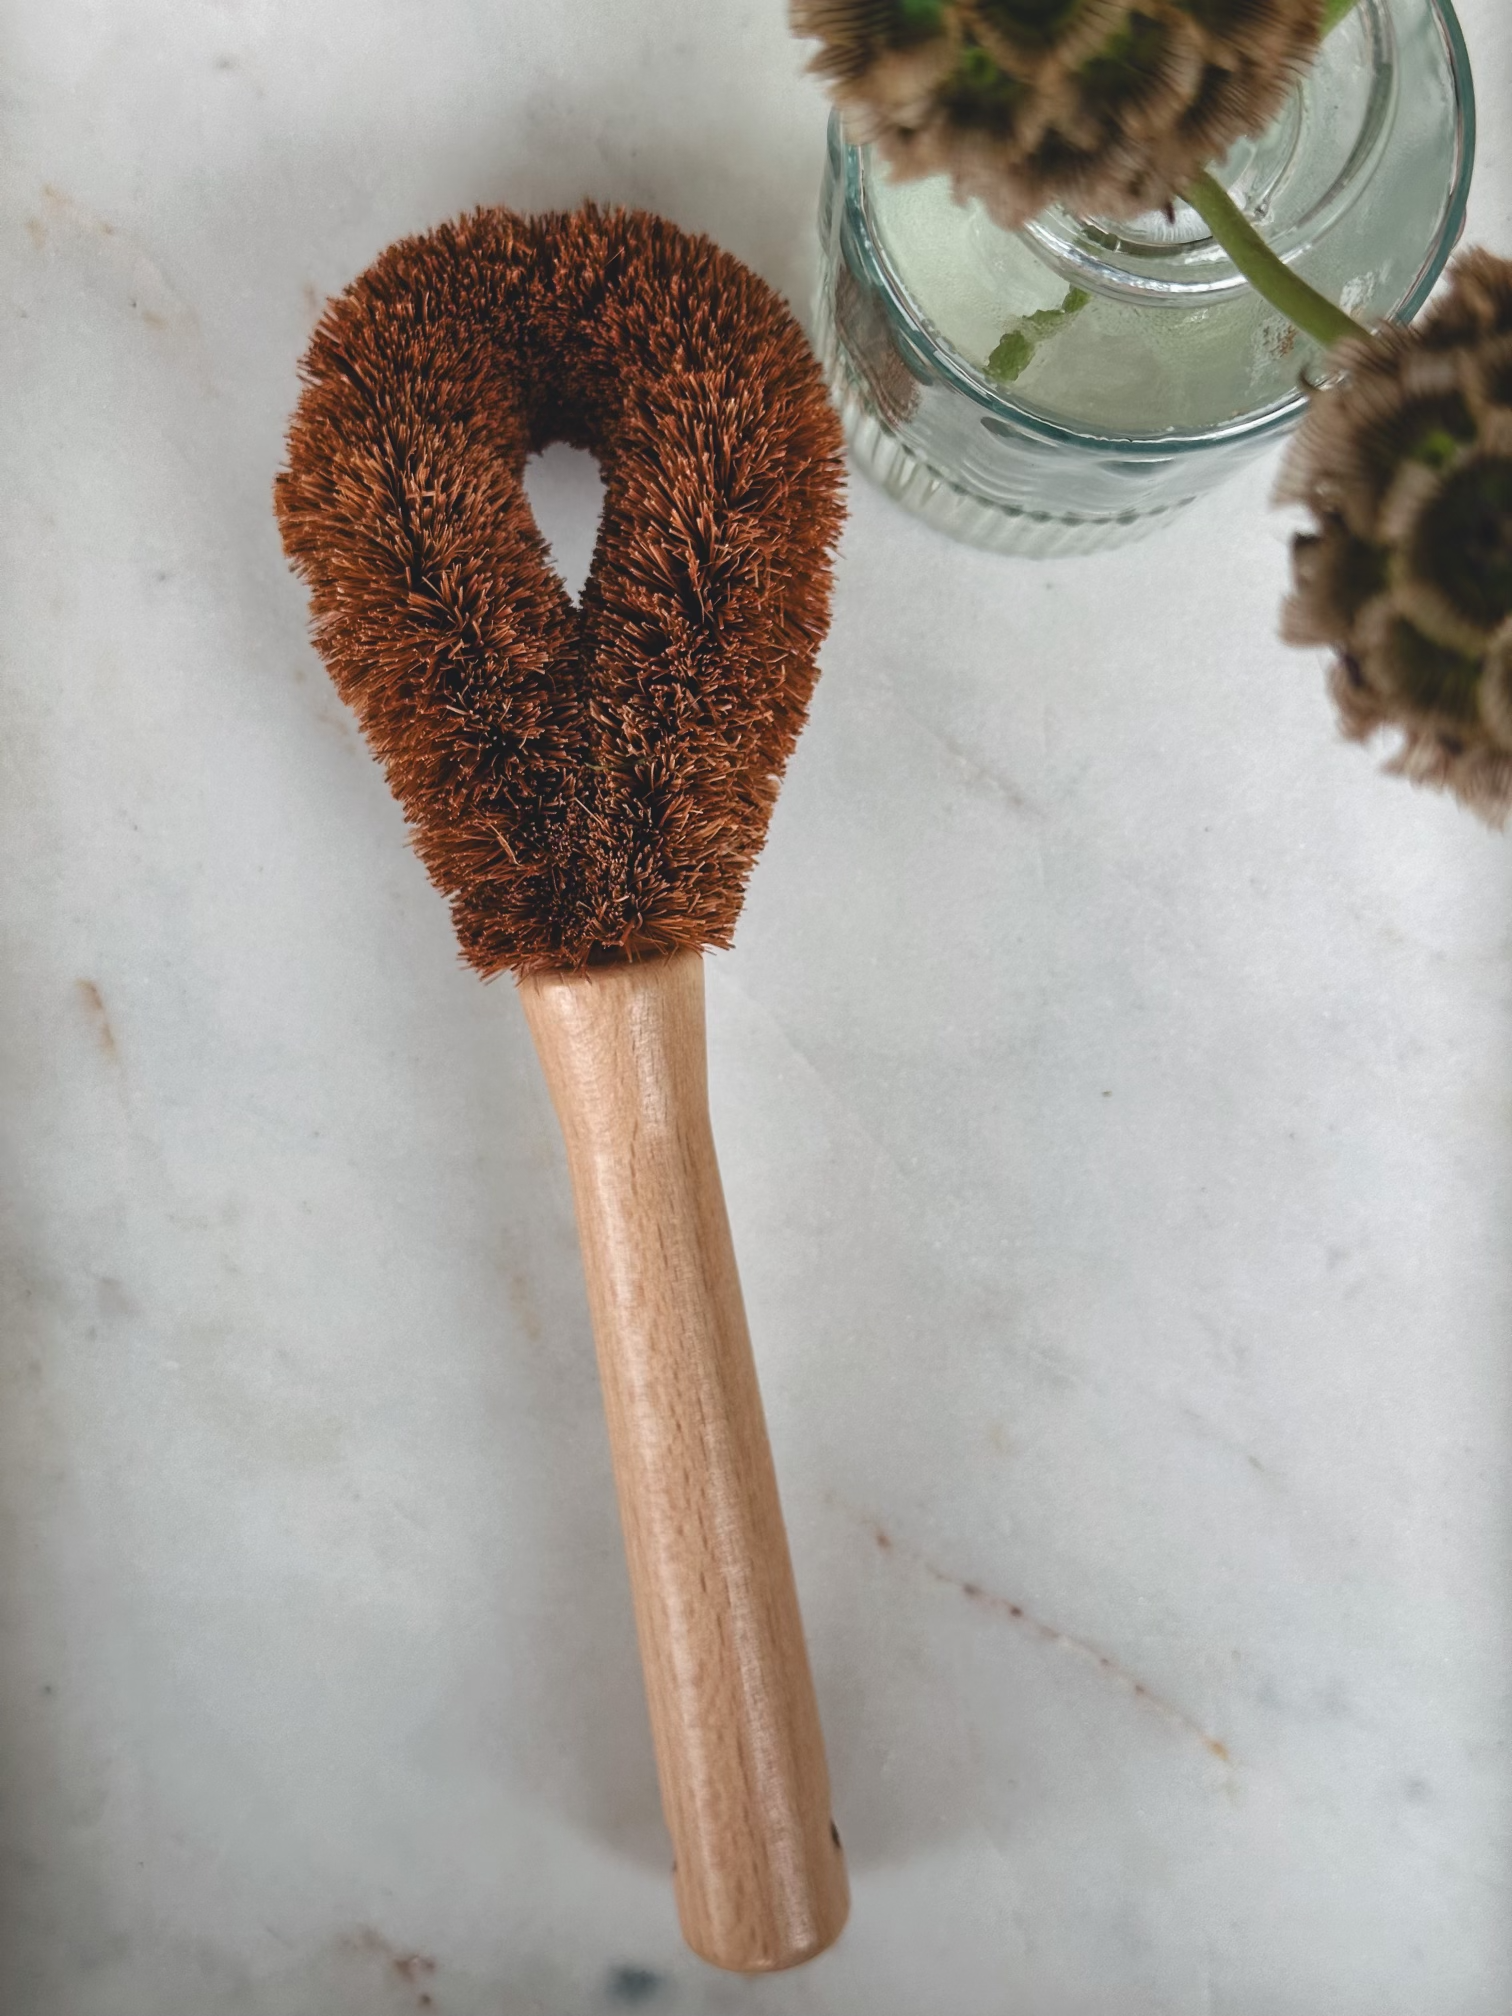 Pot brush displayed with flowers